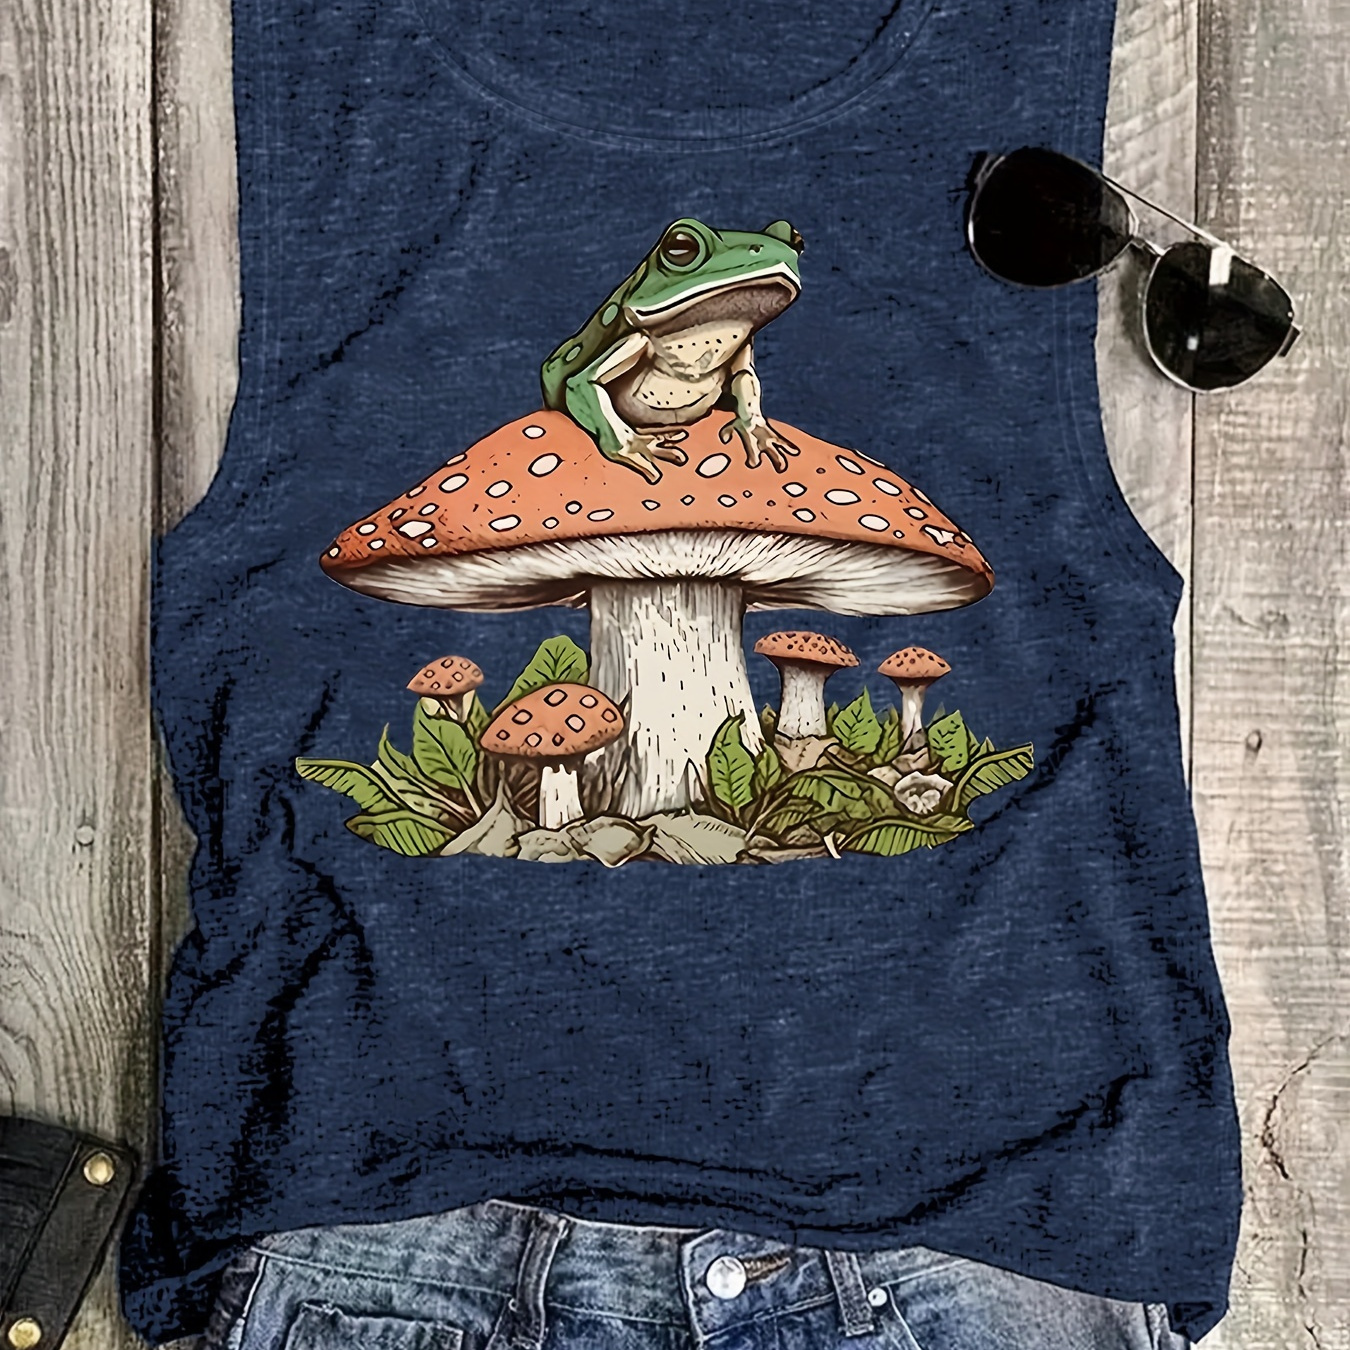 

Frog & Mushroom Print Tank Top, Sleeveless Casual Top For Summer & Spring, Women's Clothing